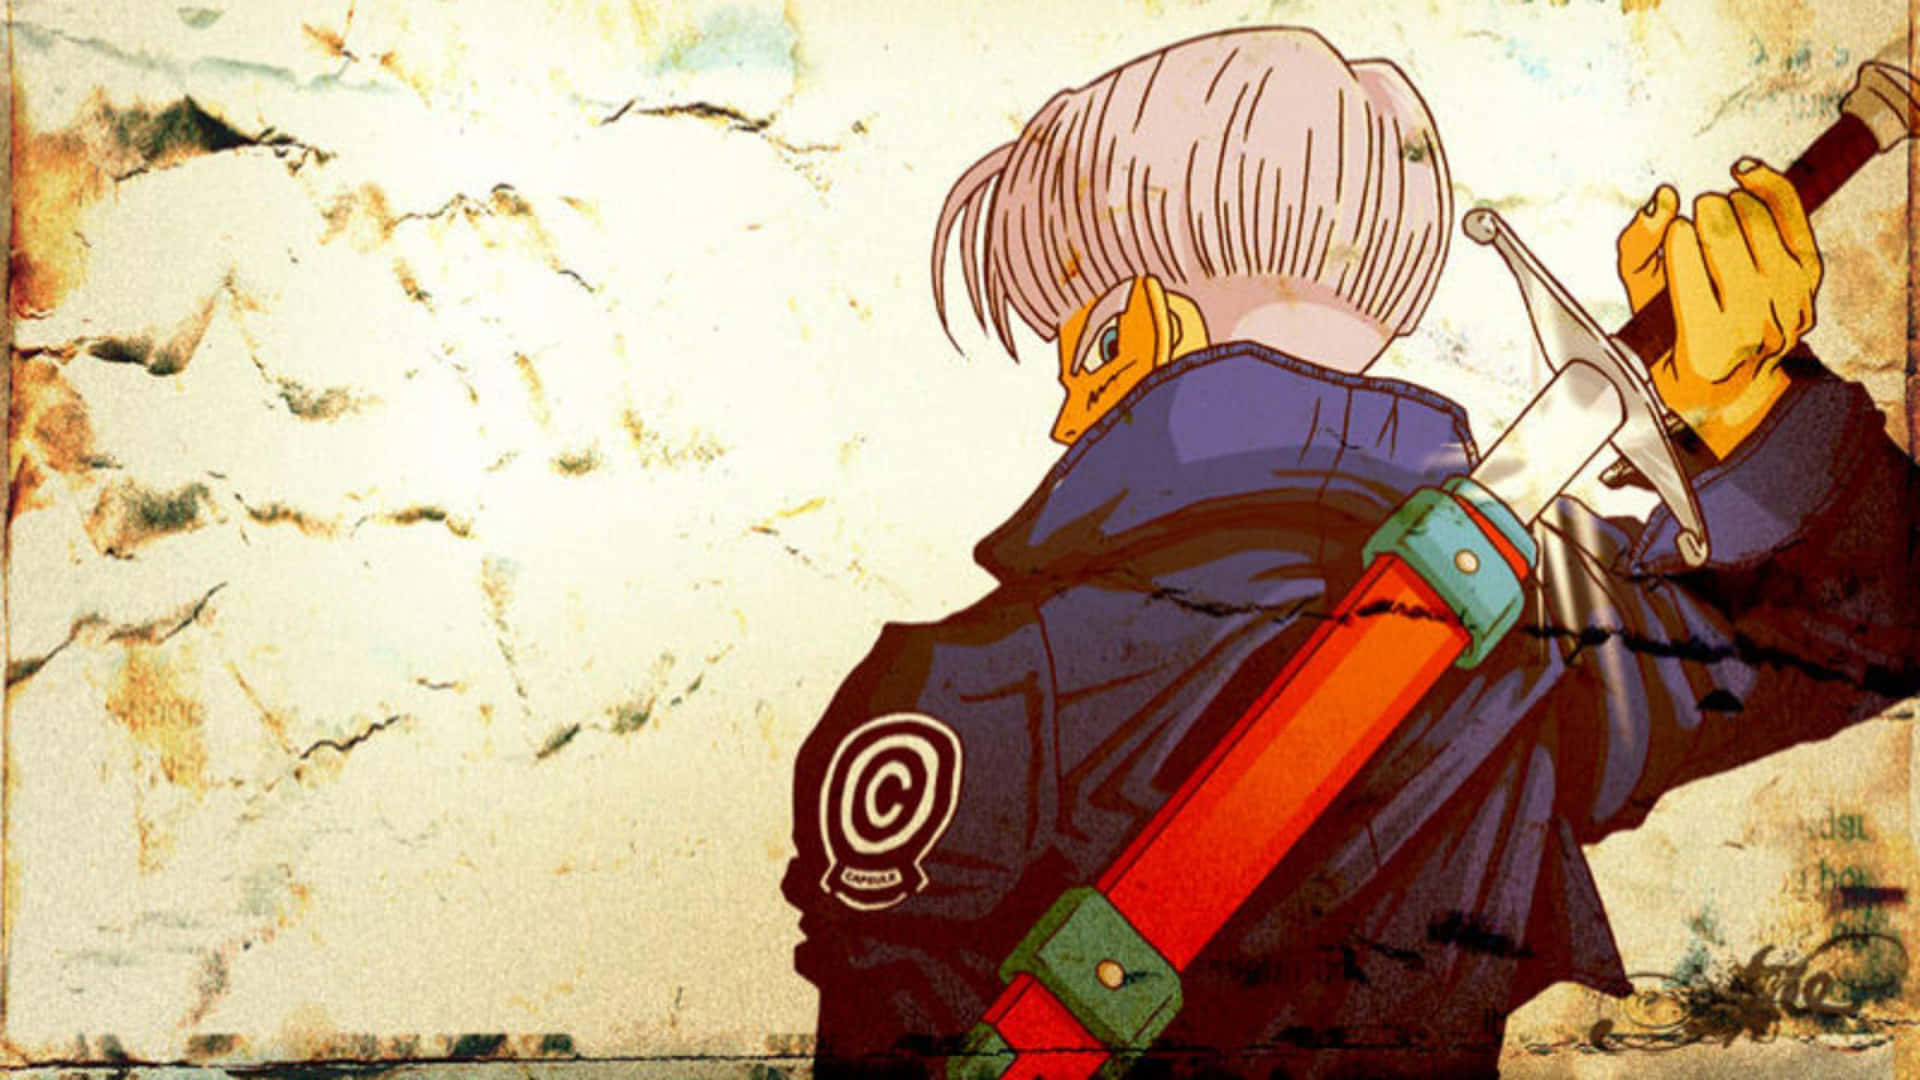 Trunks Getting Sword From His Back Wallpaper